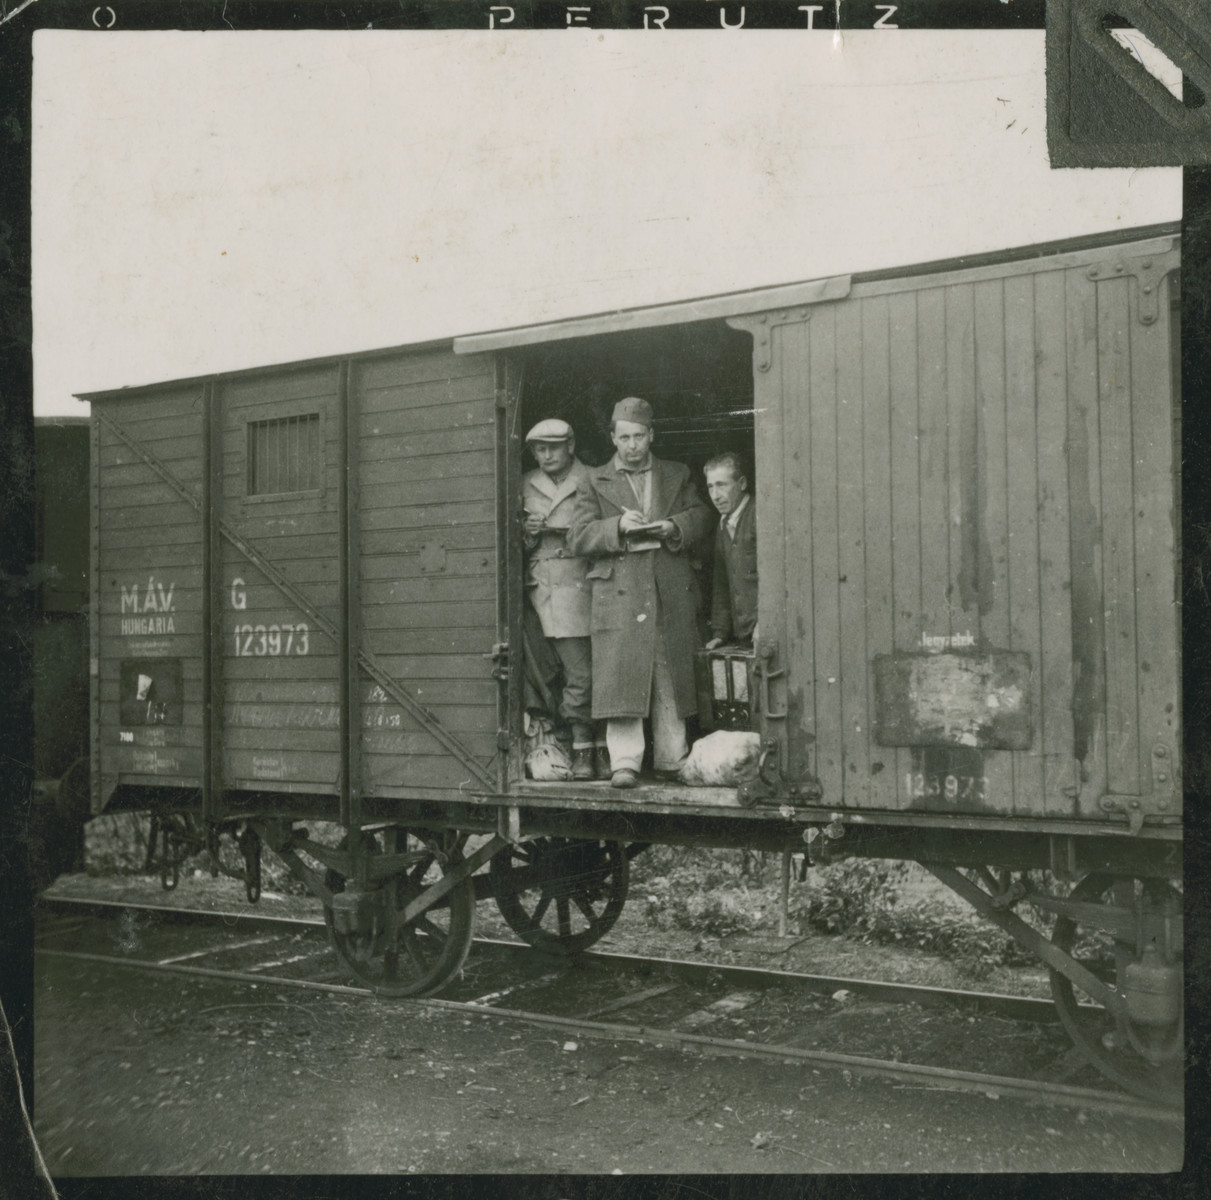 Hungarian Jews stand by the open door of a cattle car while awaiting deportation to a forced labor battalion.

Among those pictured is Imre Winkler.